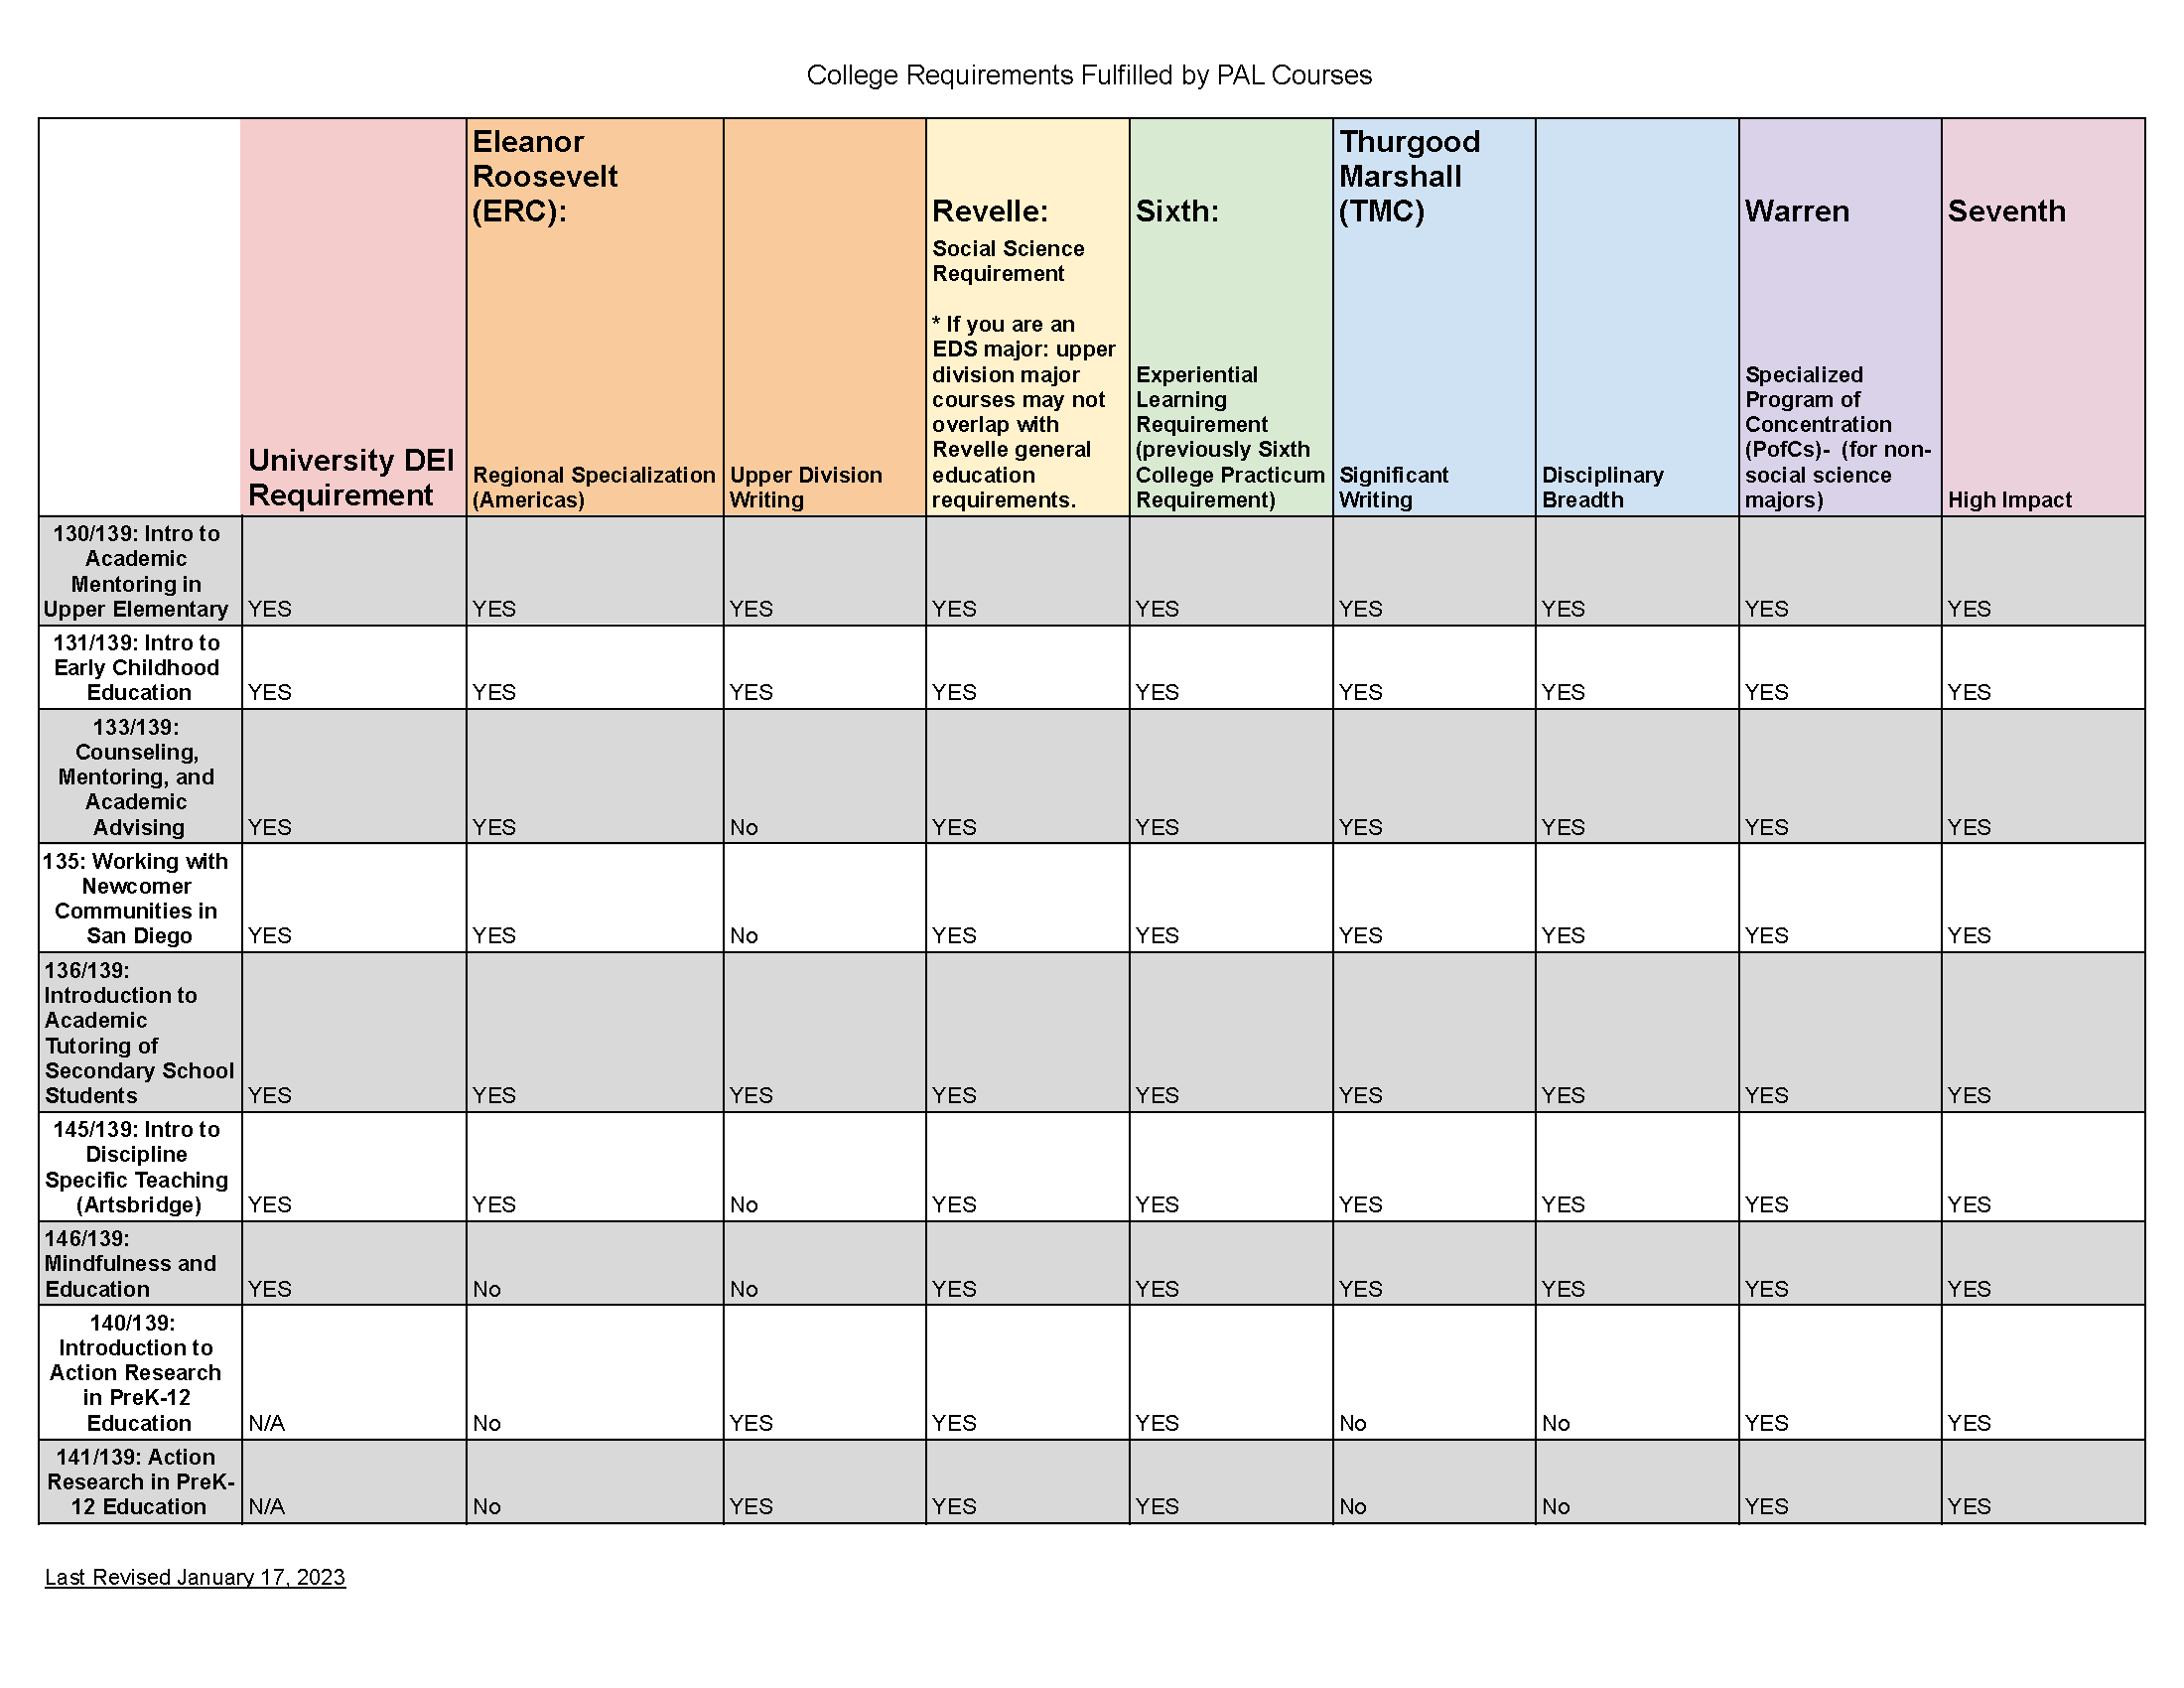 Chart of College Gen. Ed Requirements Met by PAL Courses